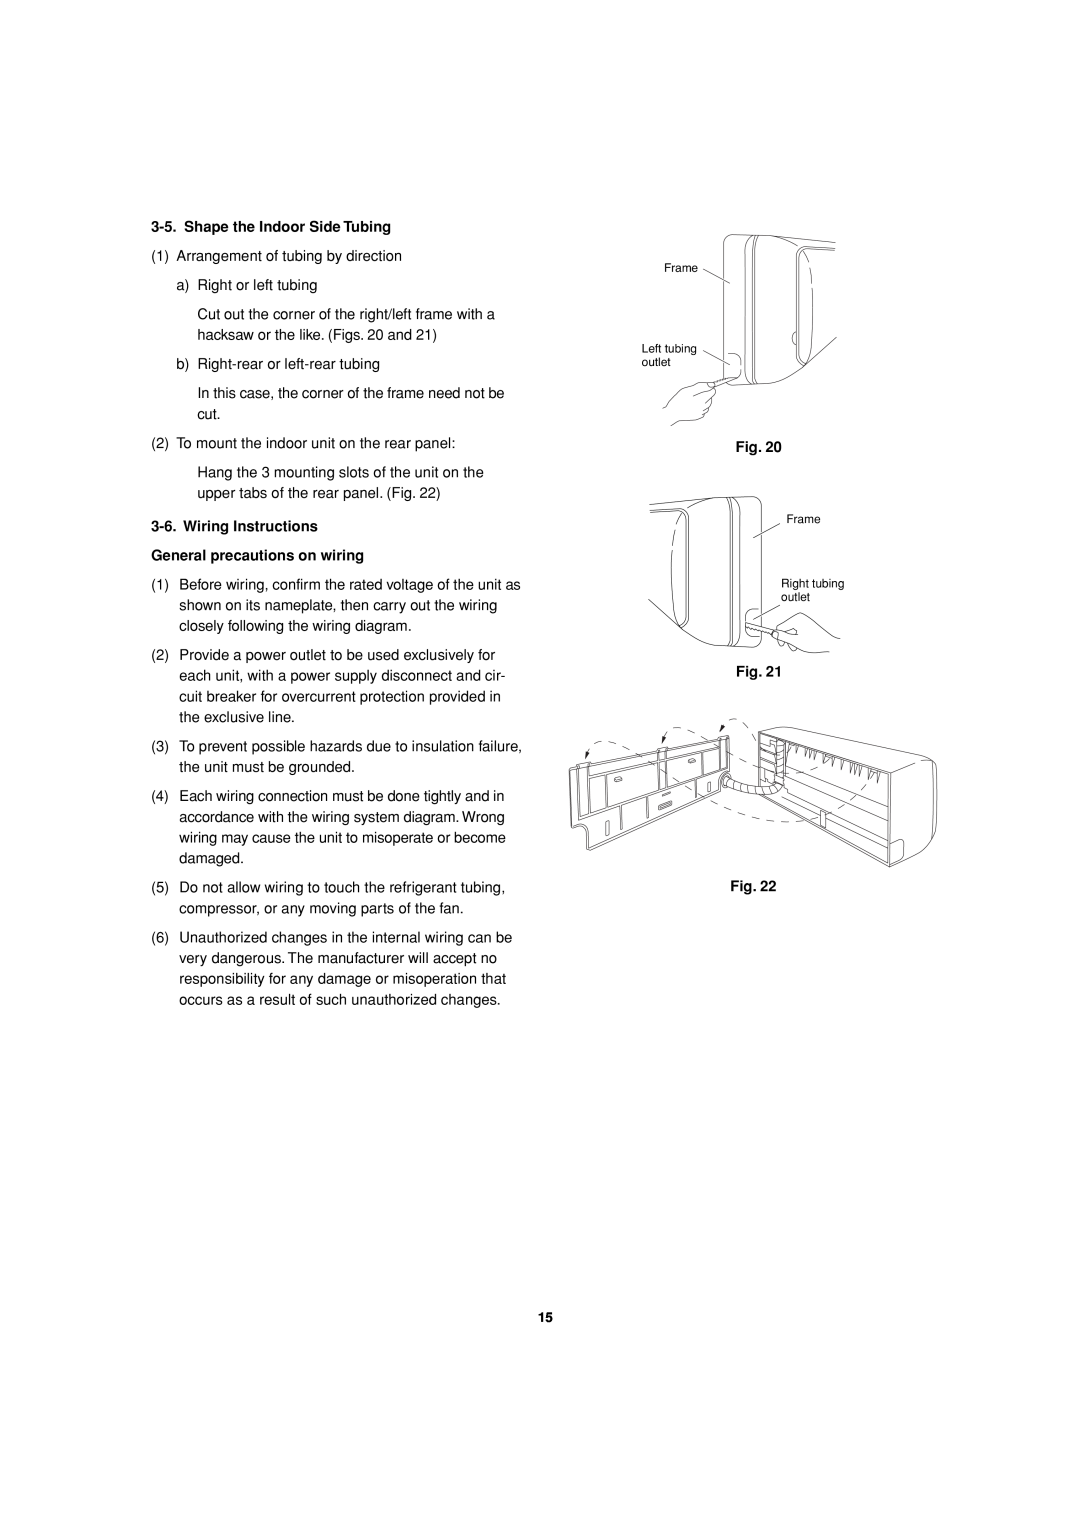 Sanyo C3682, C3082 service manual Shape the Indoor Side Tubing, Wiring Instructions General precautions on wiring 